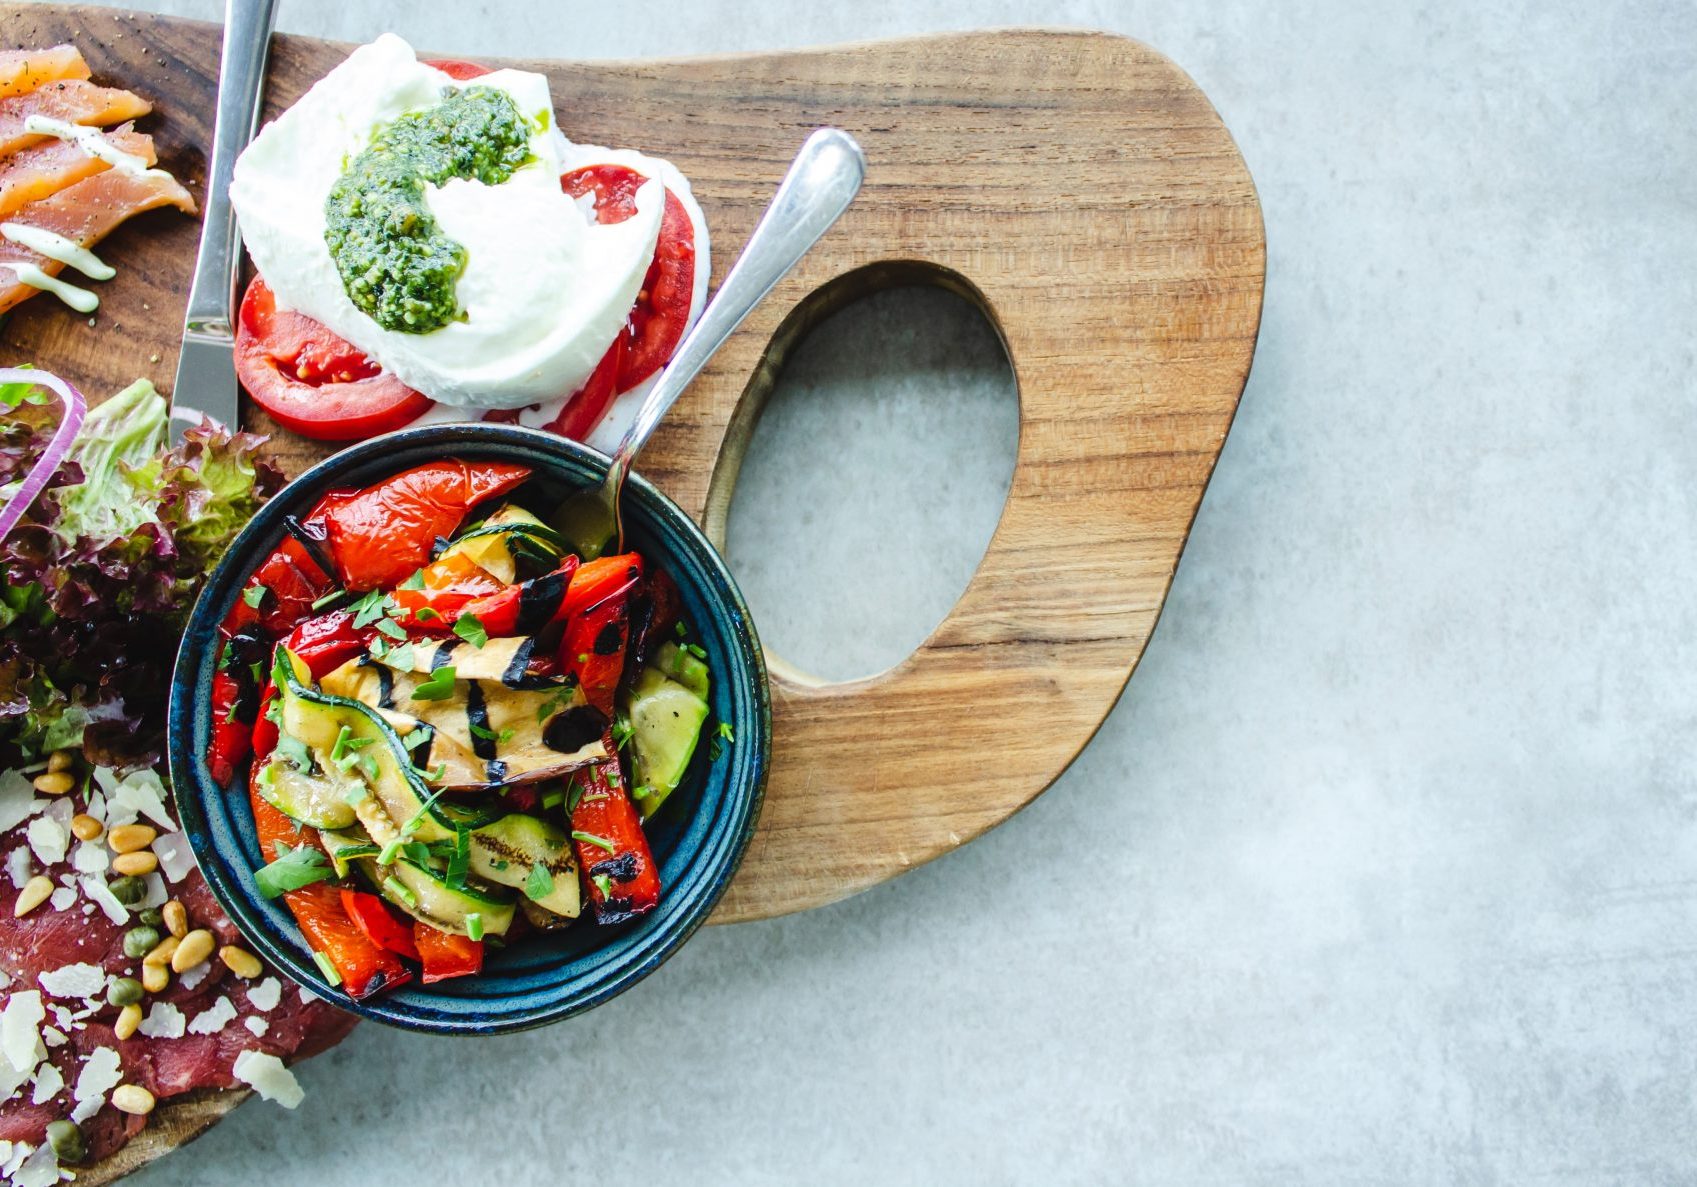 Small bowl with grilled vegetables and a dressing on top. Next to it mozzarella and tomatoes with pesto on a wooden plate on a light background